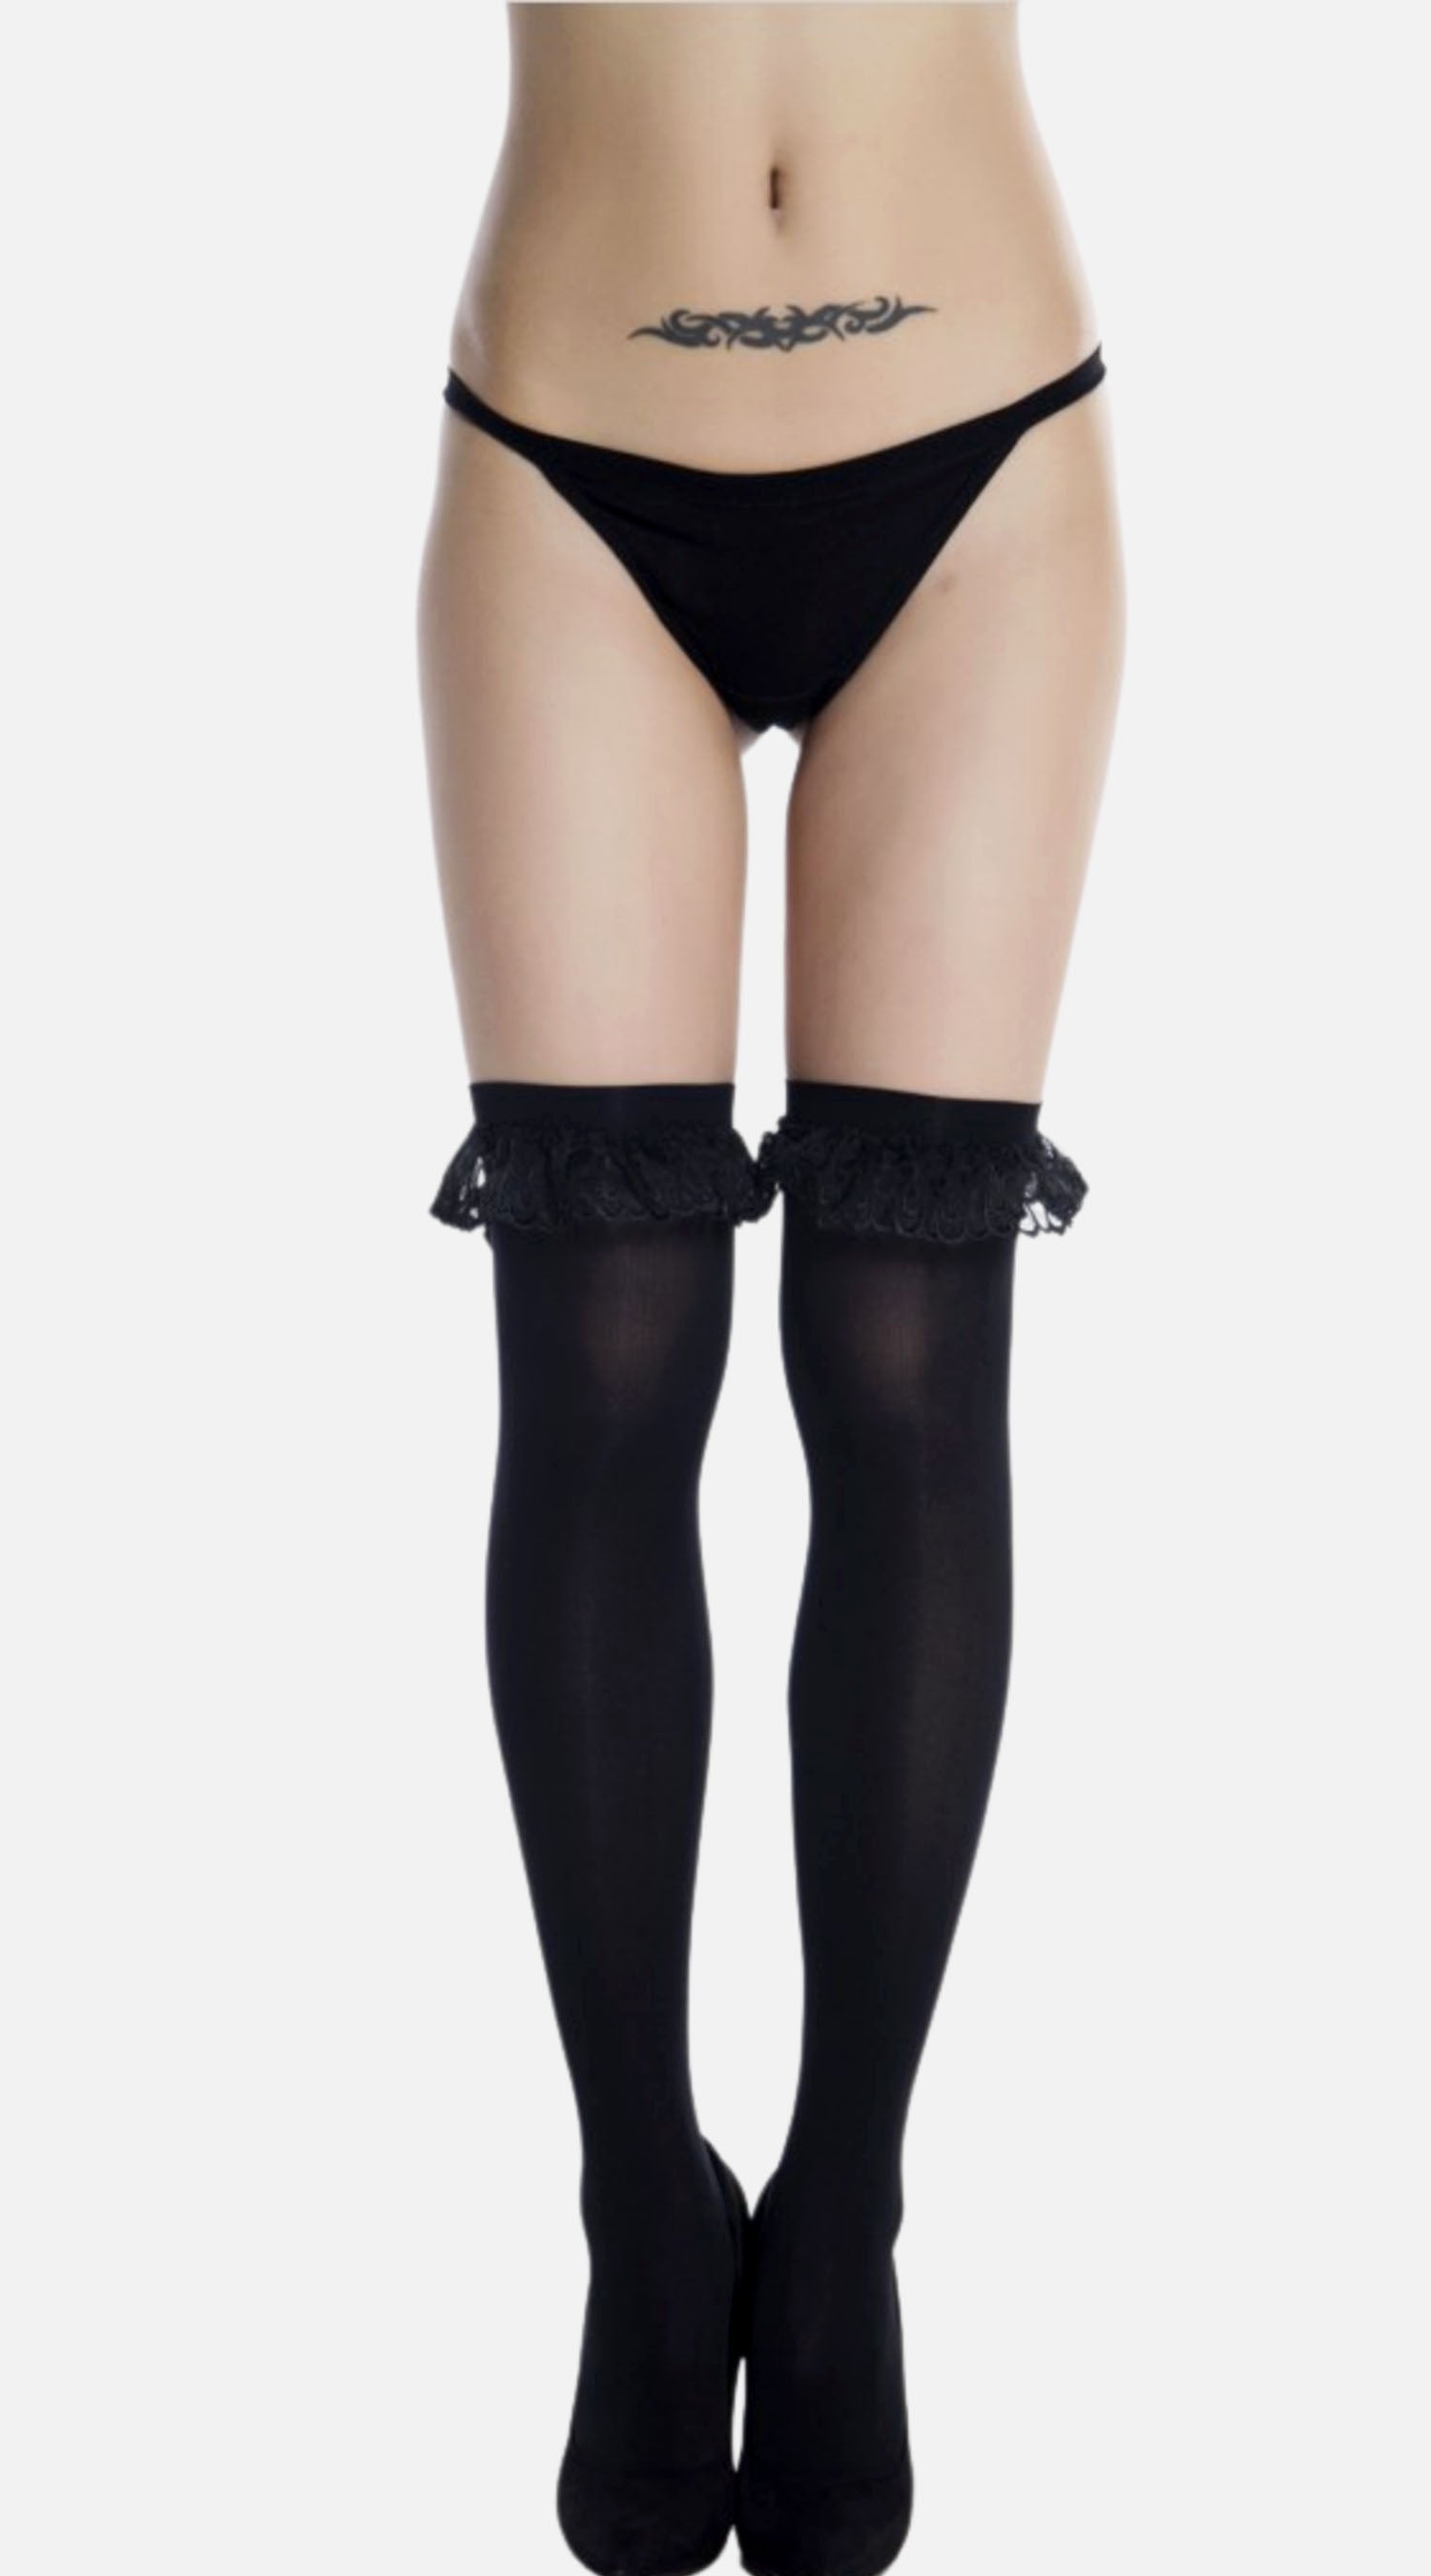 Ruffle Top Seamed Hold-Ups with Spider - My Voguish